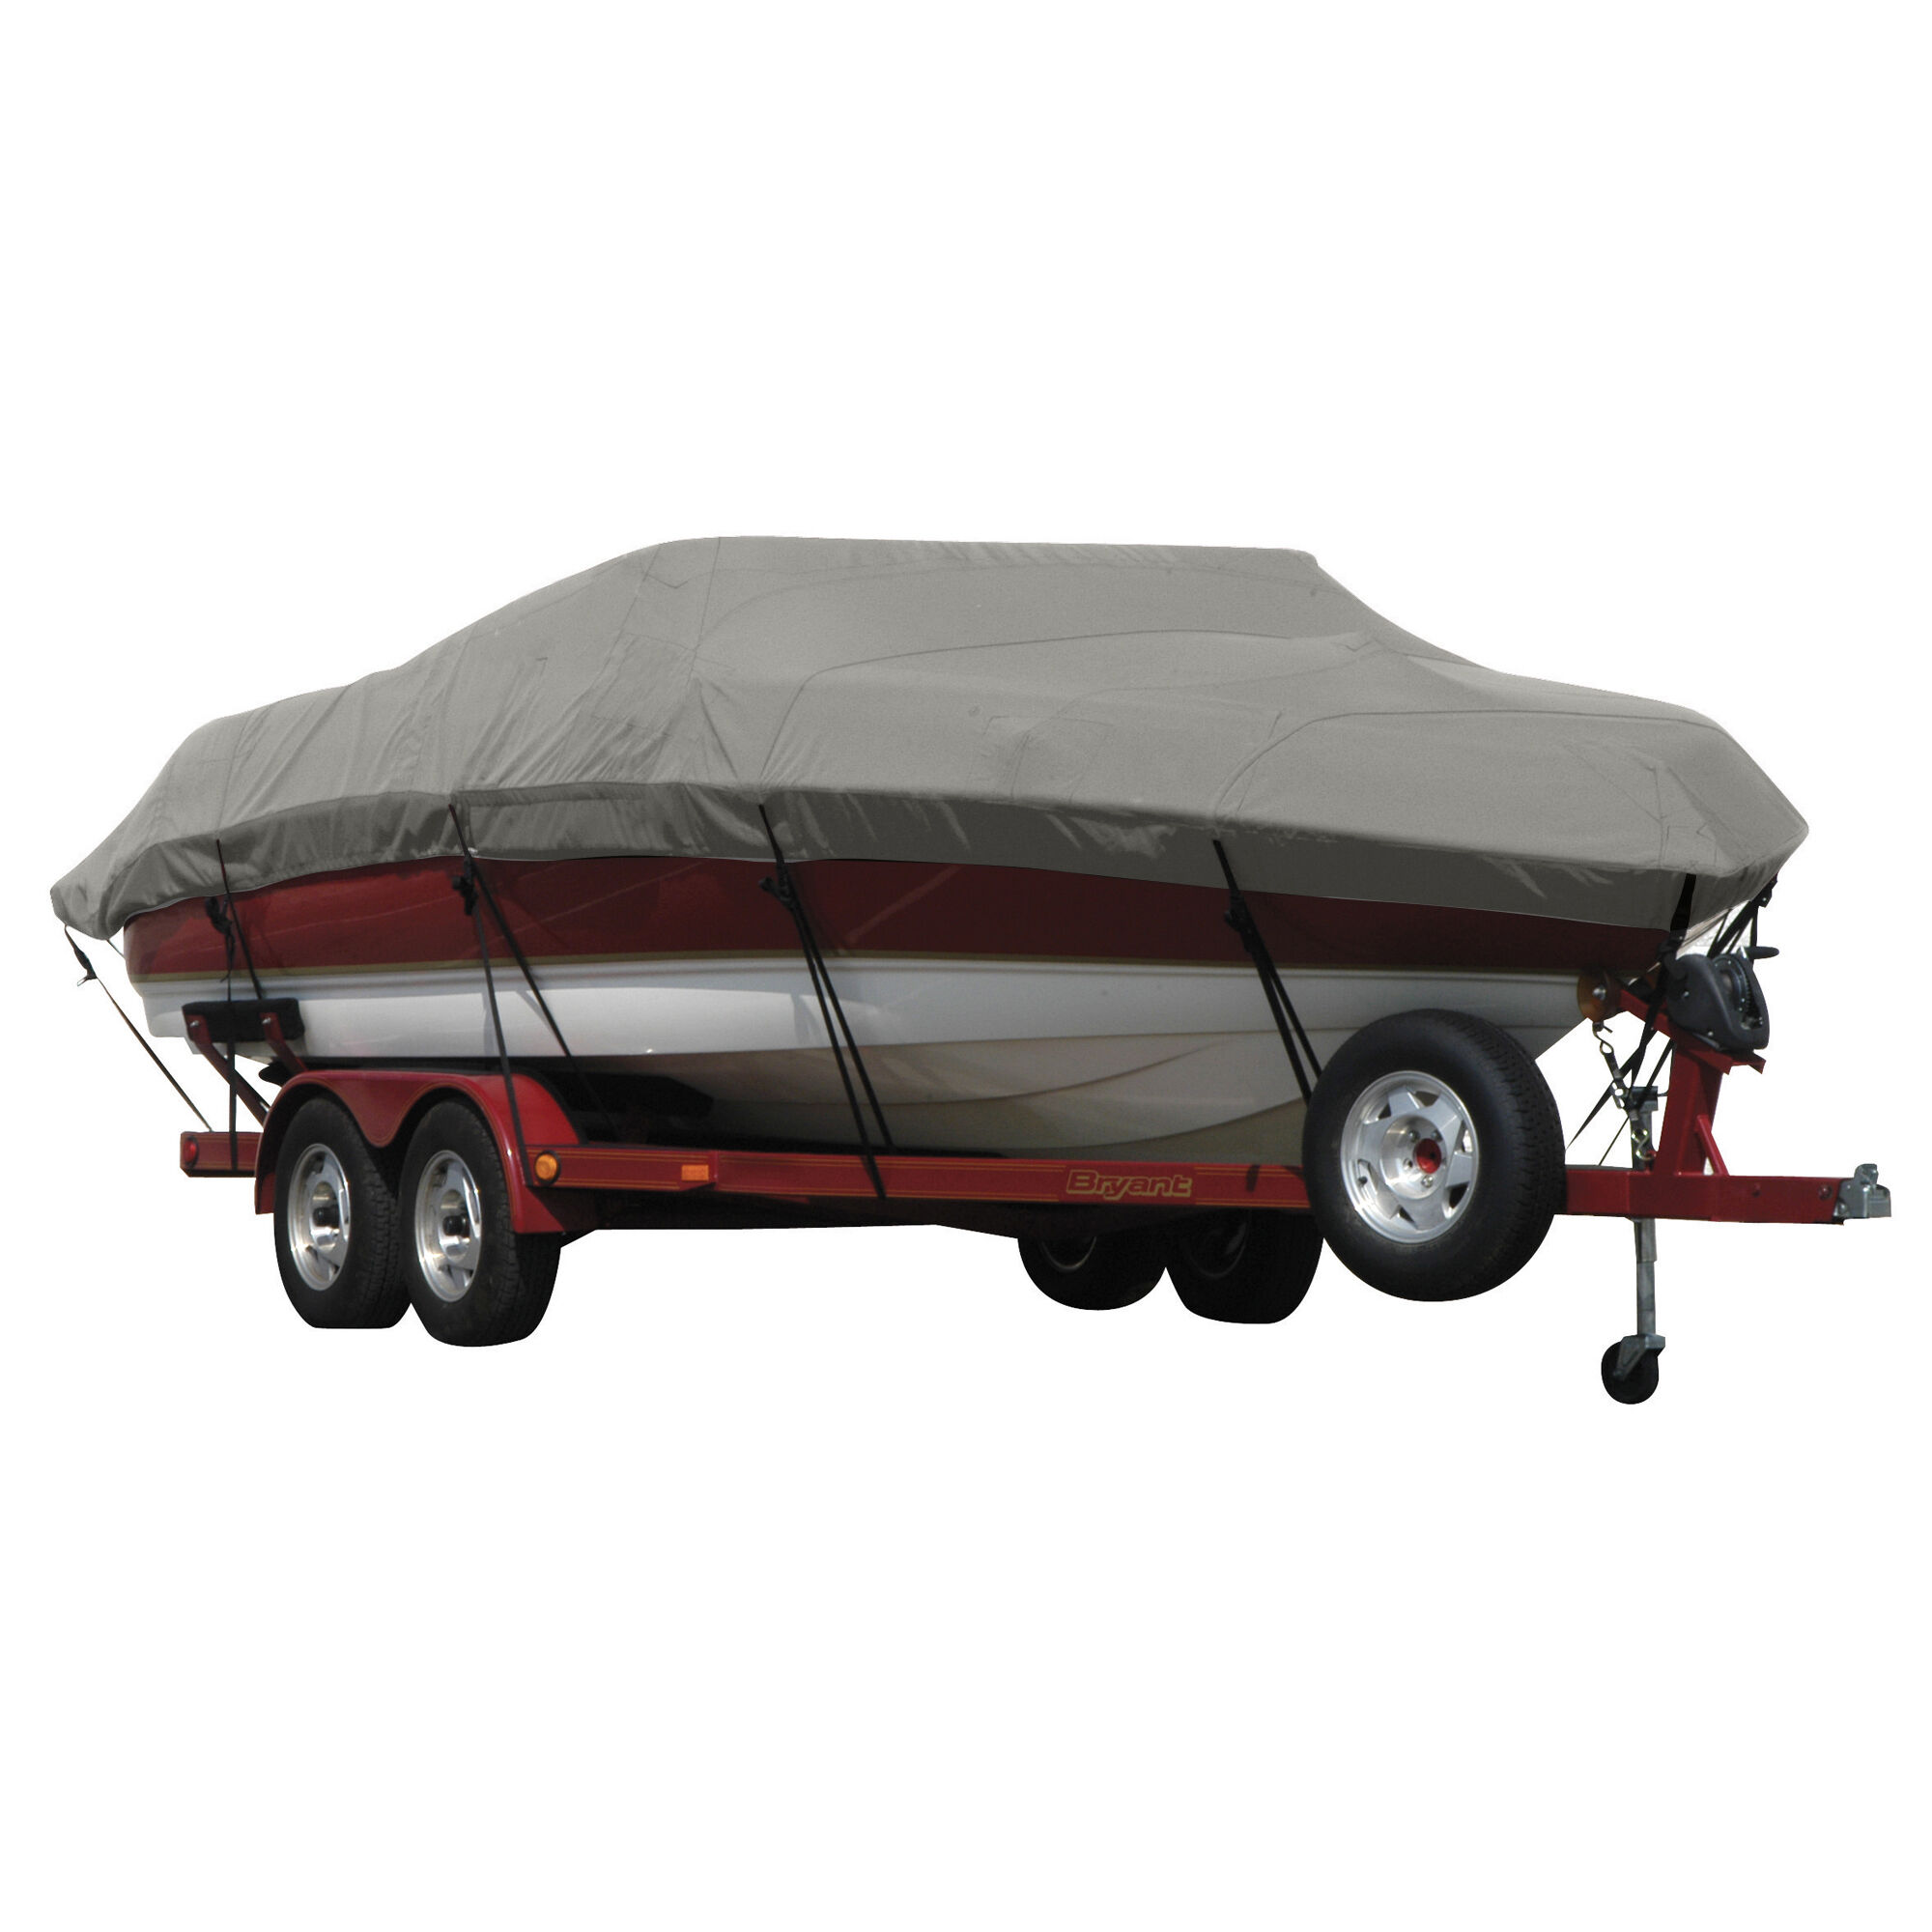 Covermate Exact Fit Sunbrella Boat Cover for Hydrodyne Gtx Air Gtx Air w/ Tower Doesn't Cover Swim PLATFORMm I/B. Charcoal Grey Heather in